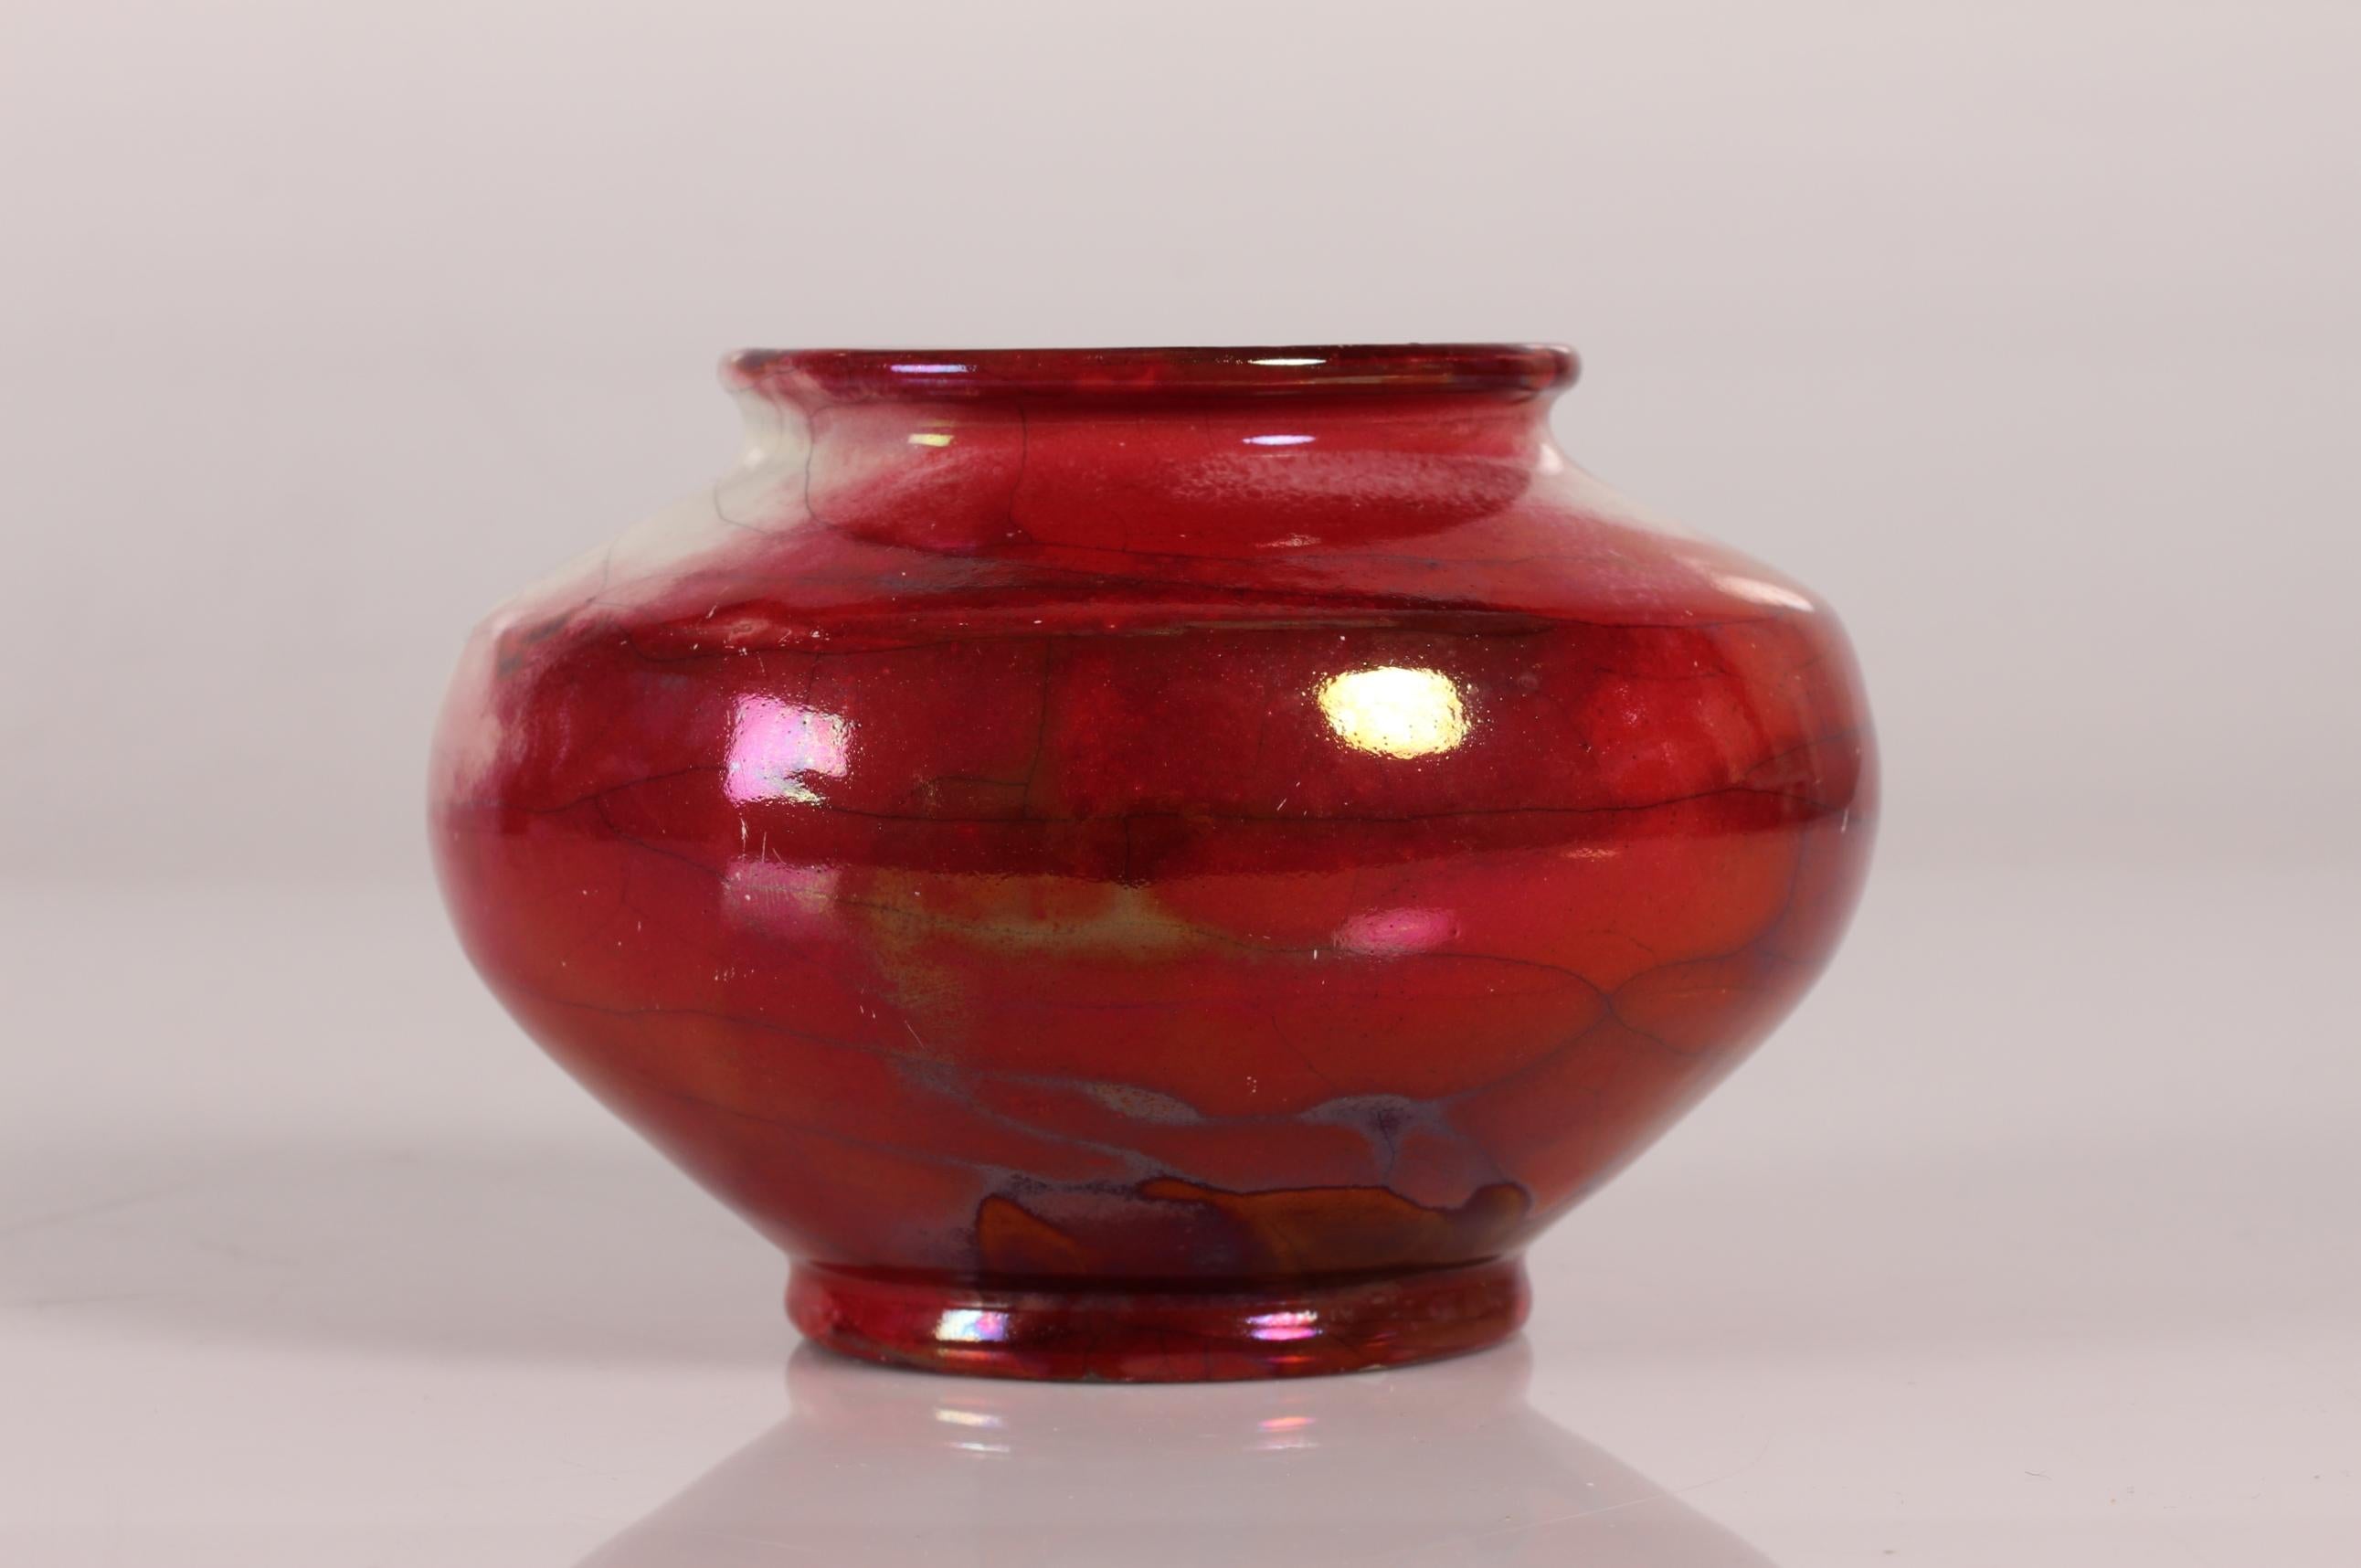 Round ceramic vase by Jens Thirslund made at Herman A. Kählers ceramic workshop in the 1920s

The vase is decorated with a shiny and smooth luster glaze, primarily red but with a tough of white, and is signed HAK + V + Denmark

Measures: Height